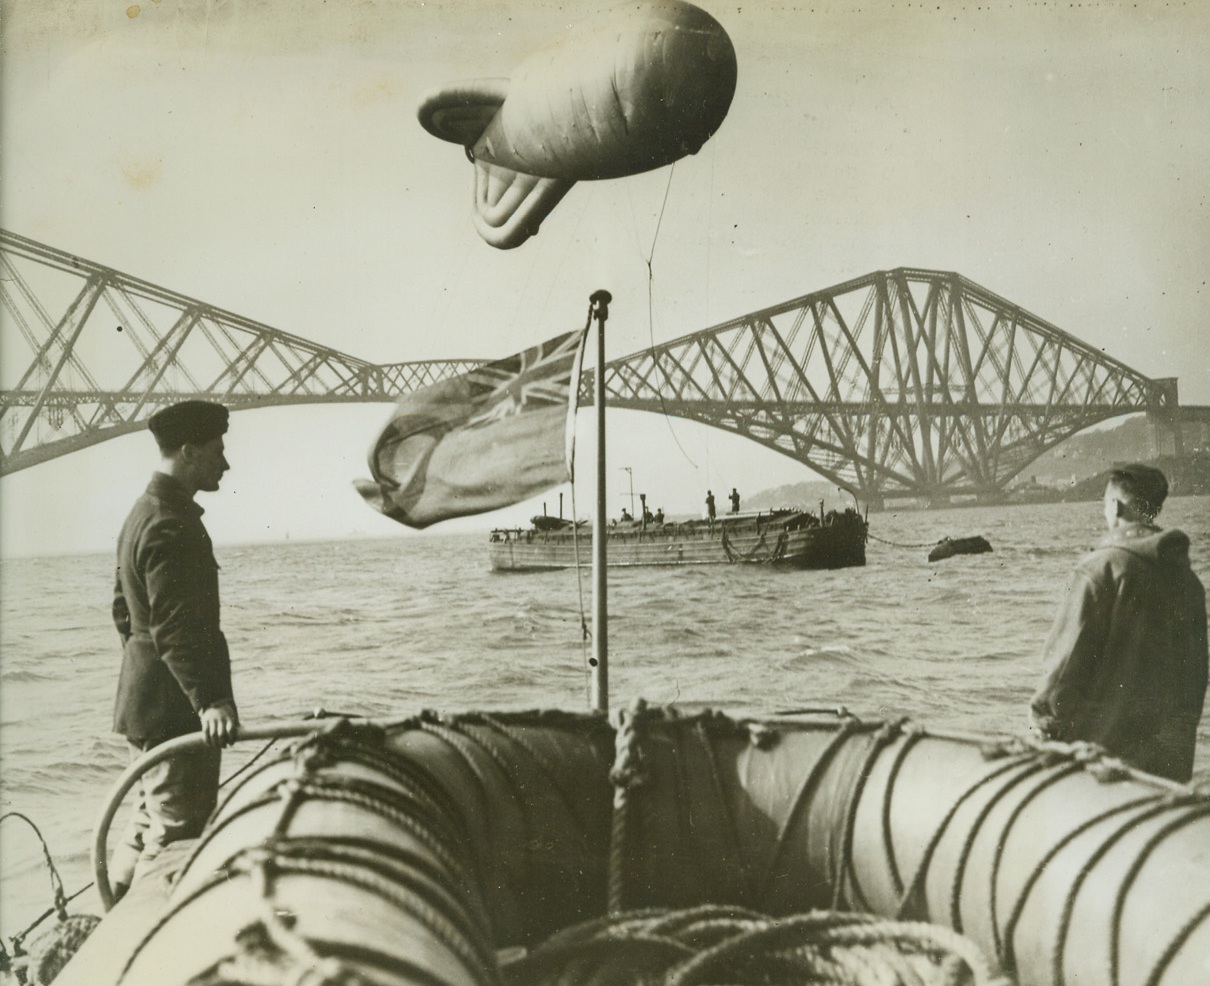 Barrage Balloon Over the Firth of Forth, 5/18/1942. FIRTH OF FORTH, SCOTLAND—Barrage balloon, as it floats over its anchor barge, part of the defenses of the Firth of Forth, where Nazi Air Force struck during the early part of the war. Famous Firth of Forth bridge can be seen in the background. Credit: ACME.;